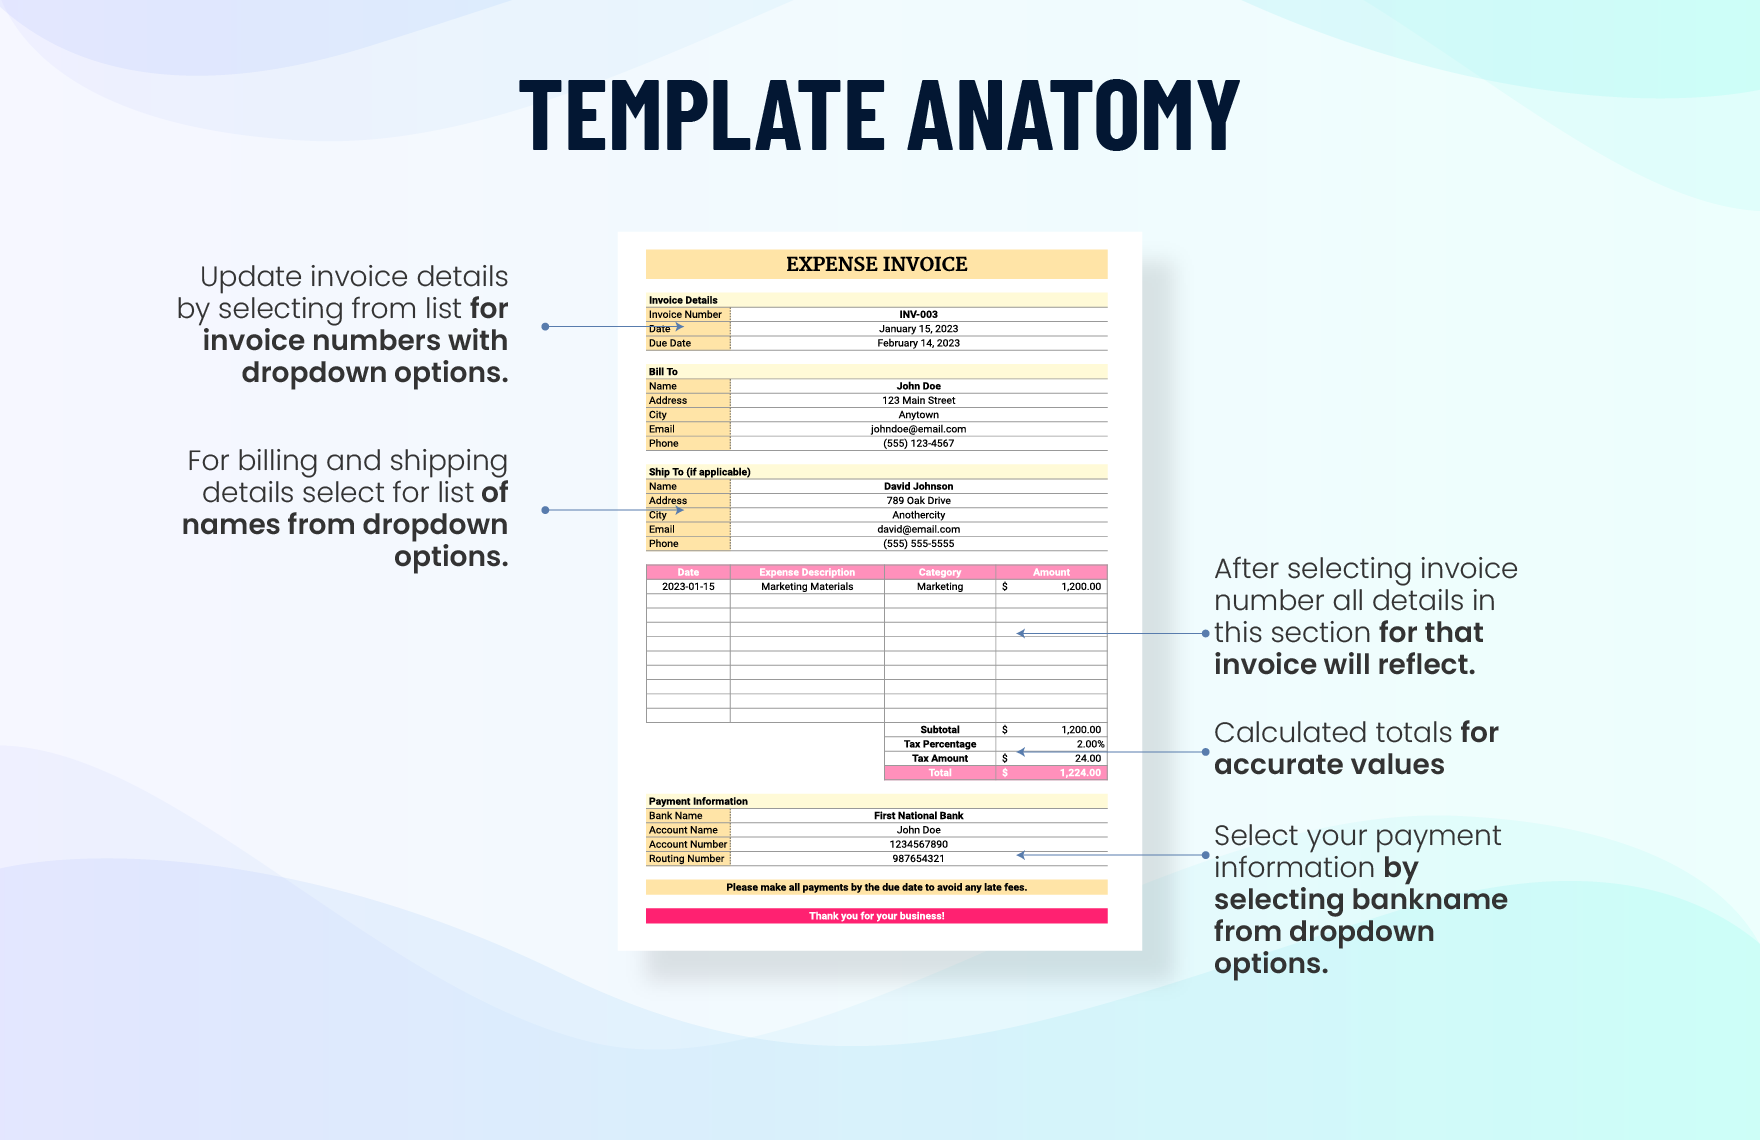 Expense Invoice Template